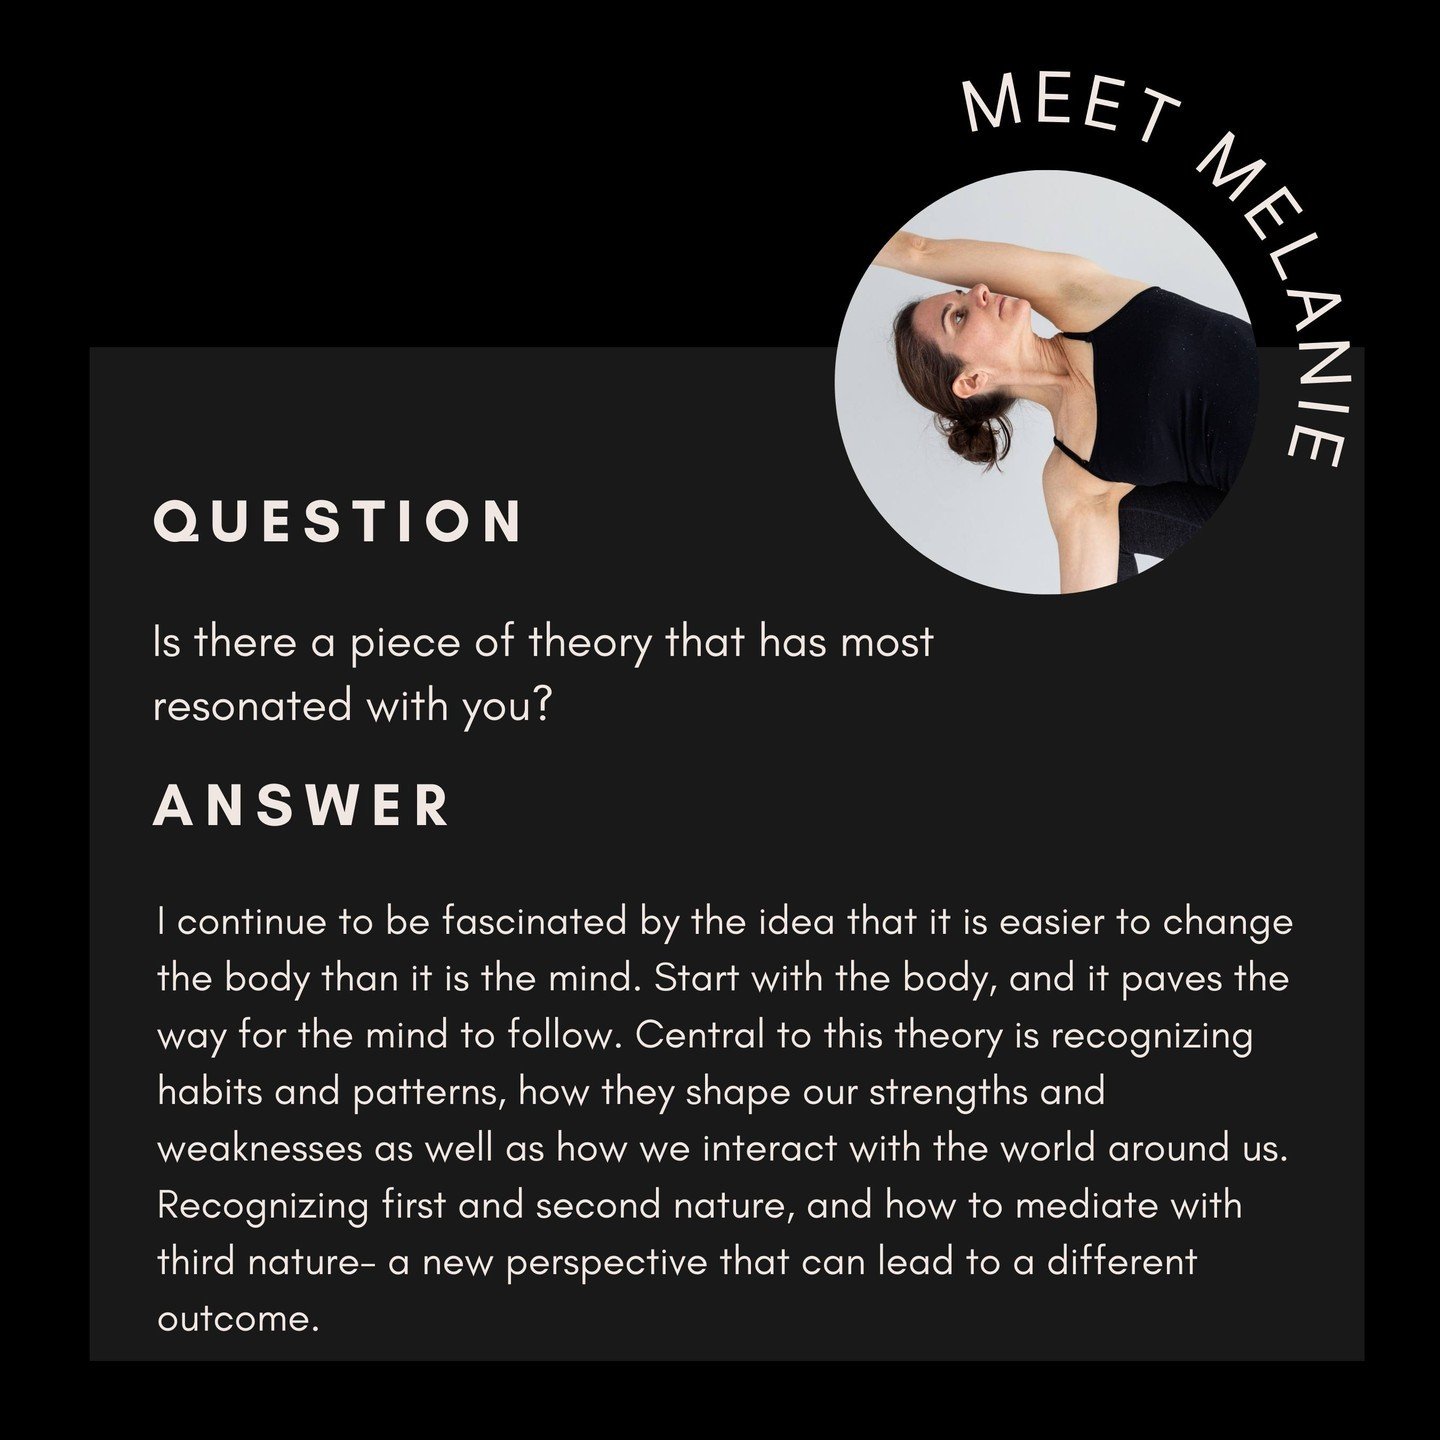 Make Archetype Yoga your go to spot on Saturday's at 10am to take from talented instructors as part of our Katonah Master Series. Meet your next instructor: @melaniehyman

With a background in dance, movement therapy and yoga spanning over two decade